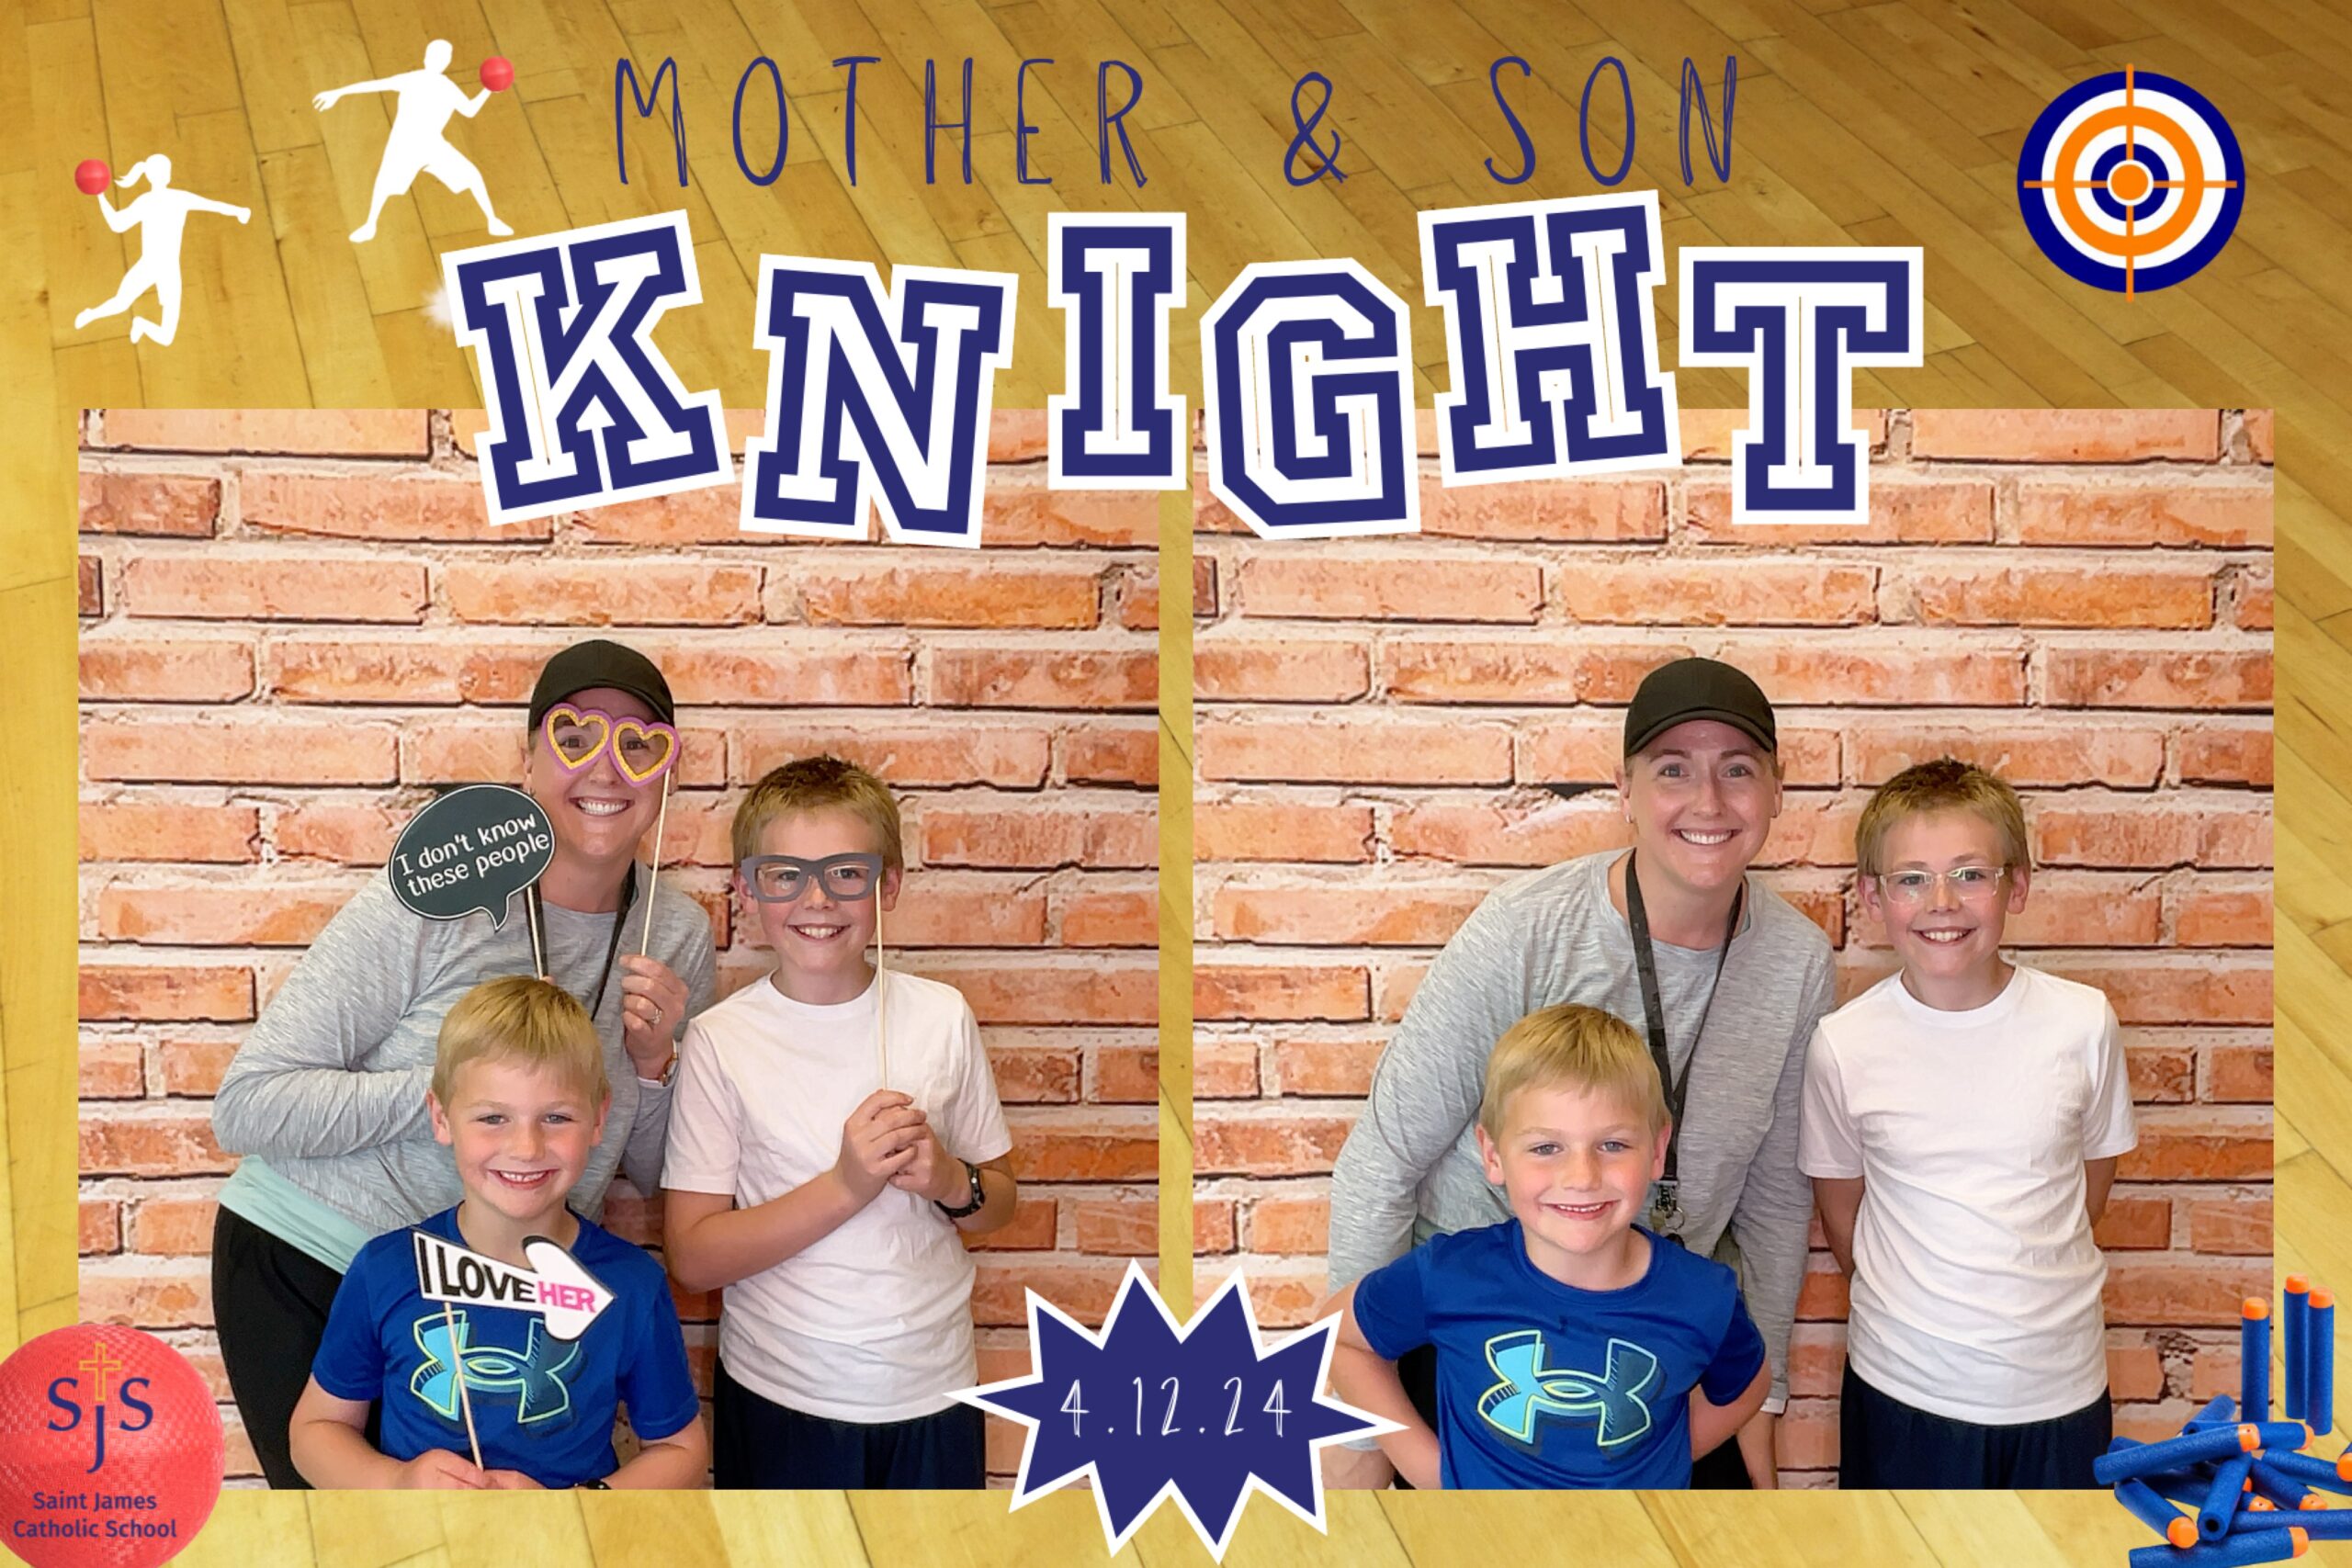 Mother/Son Knight